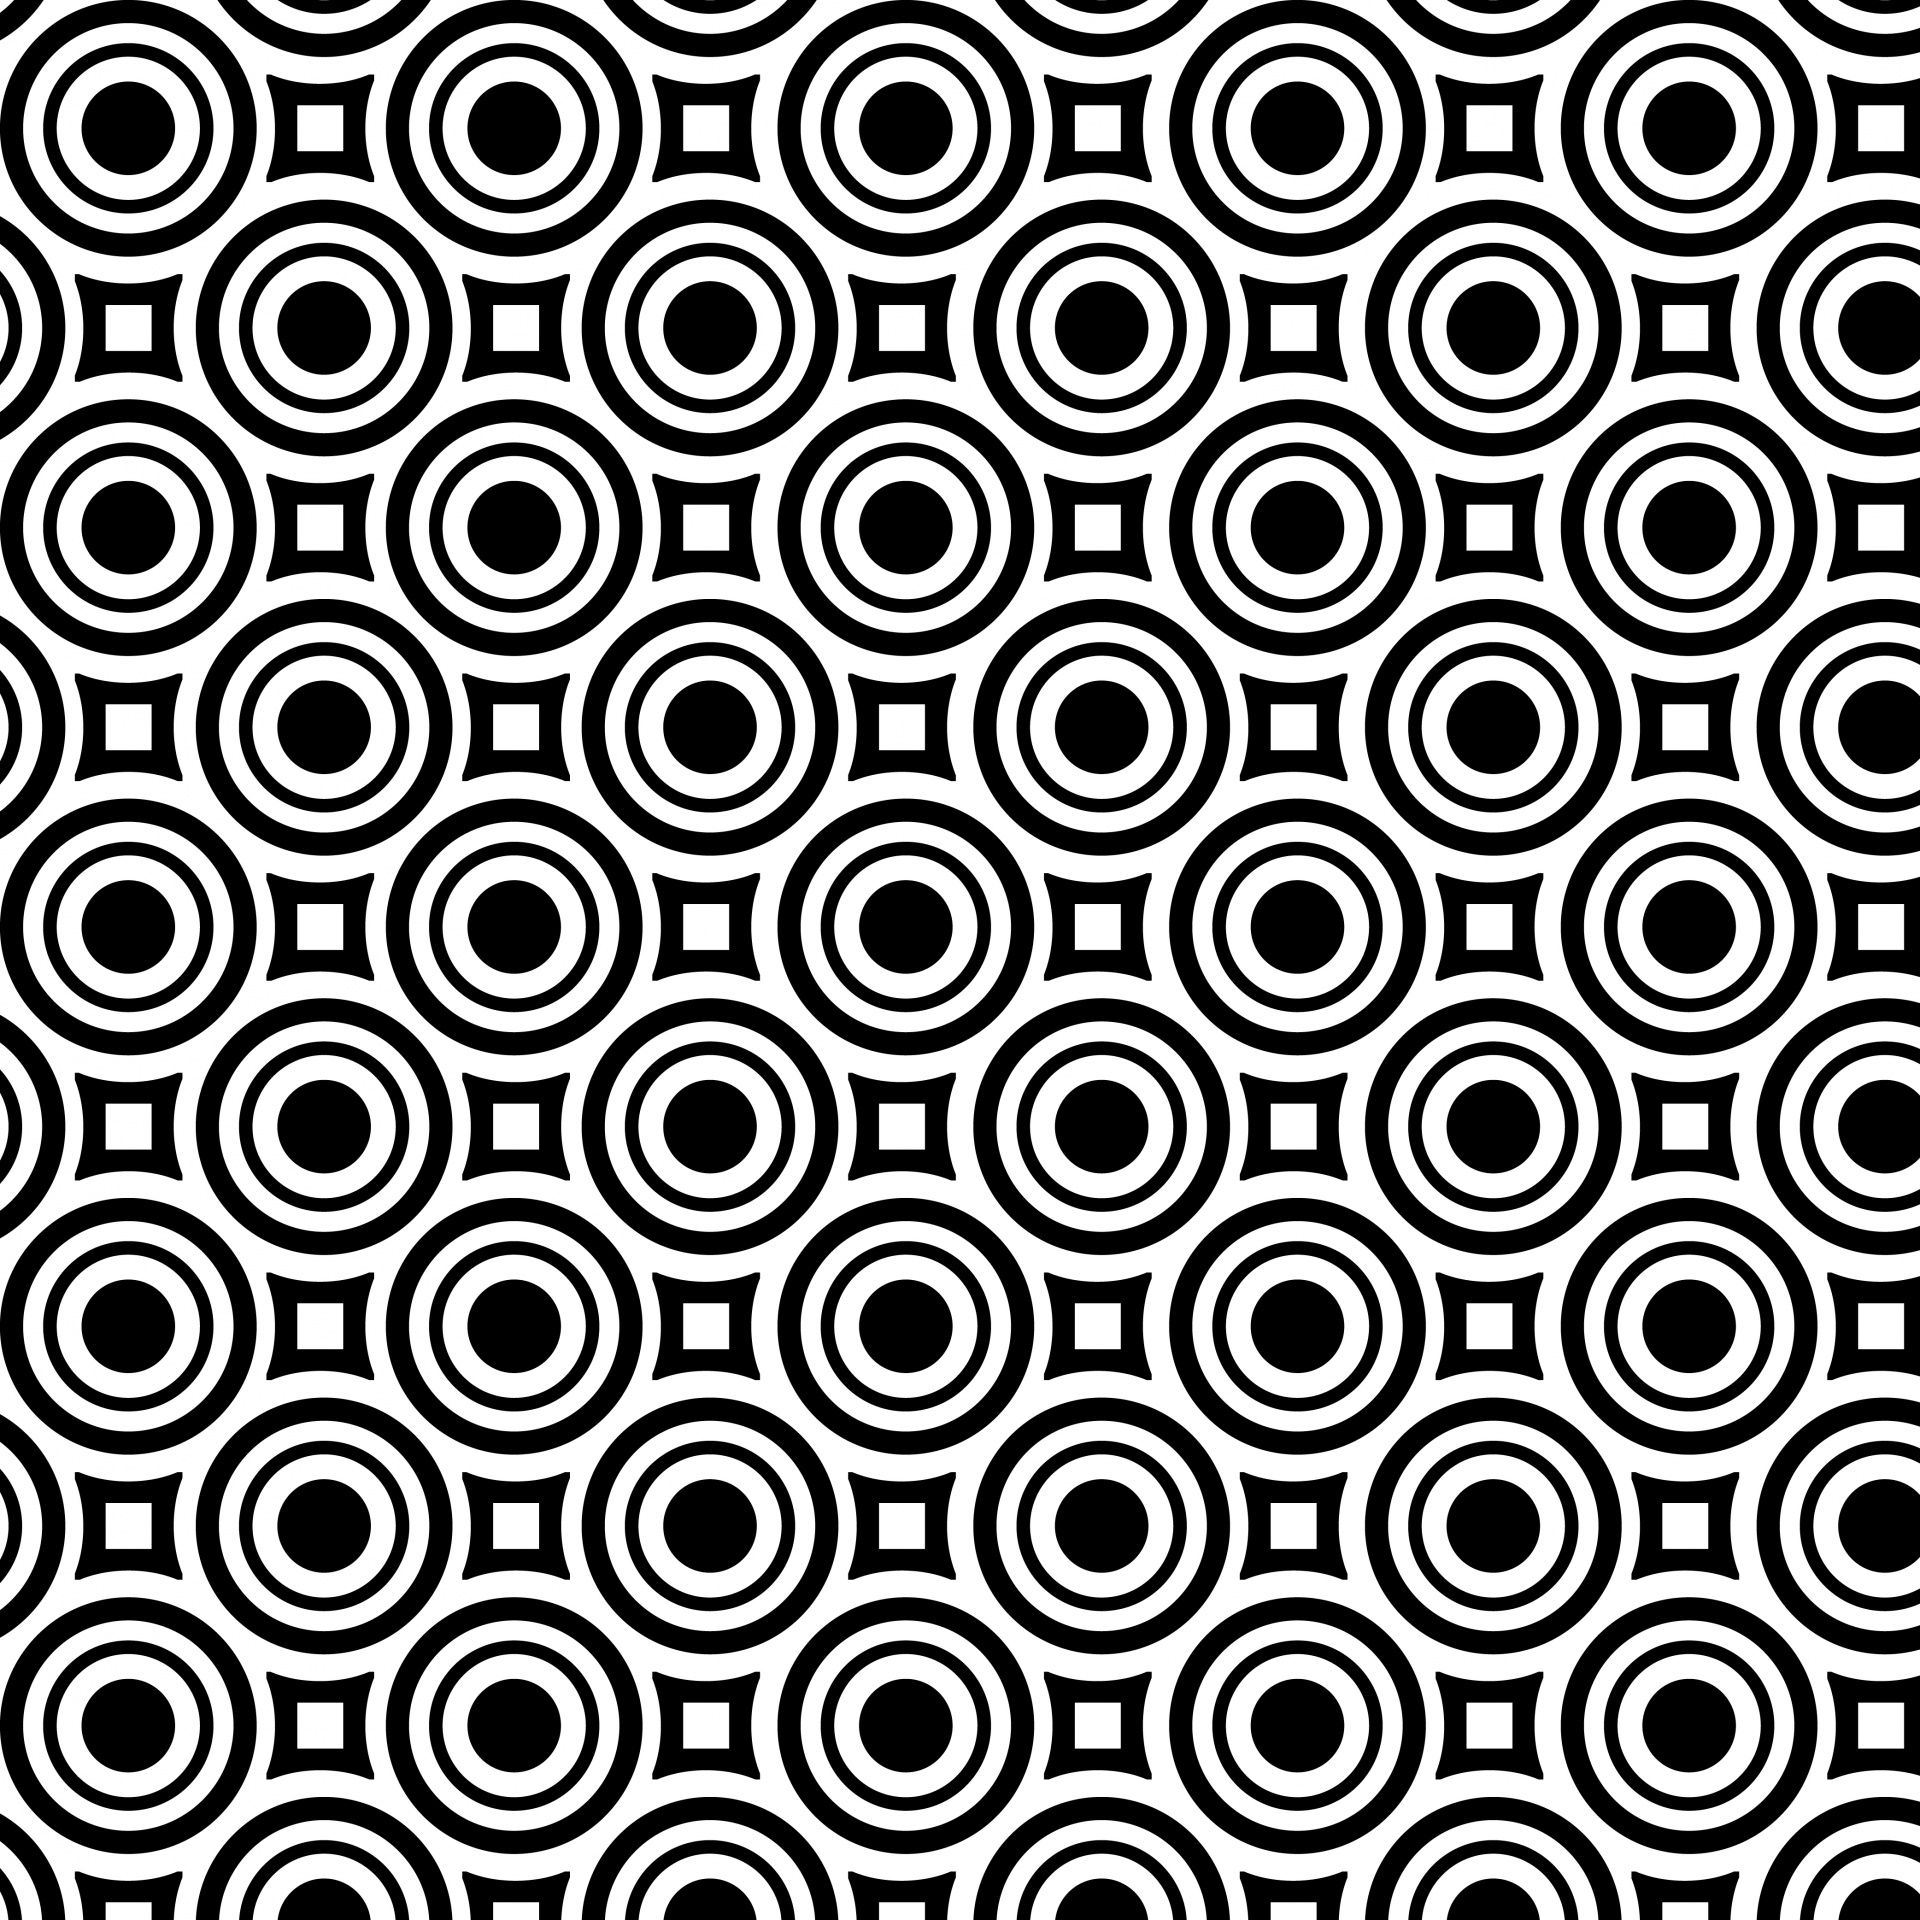 Abstract Background Black Circles